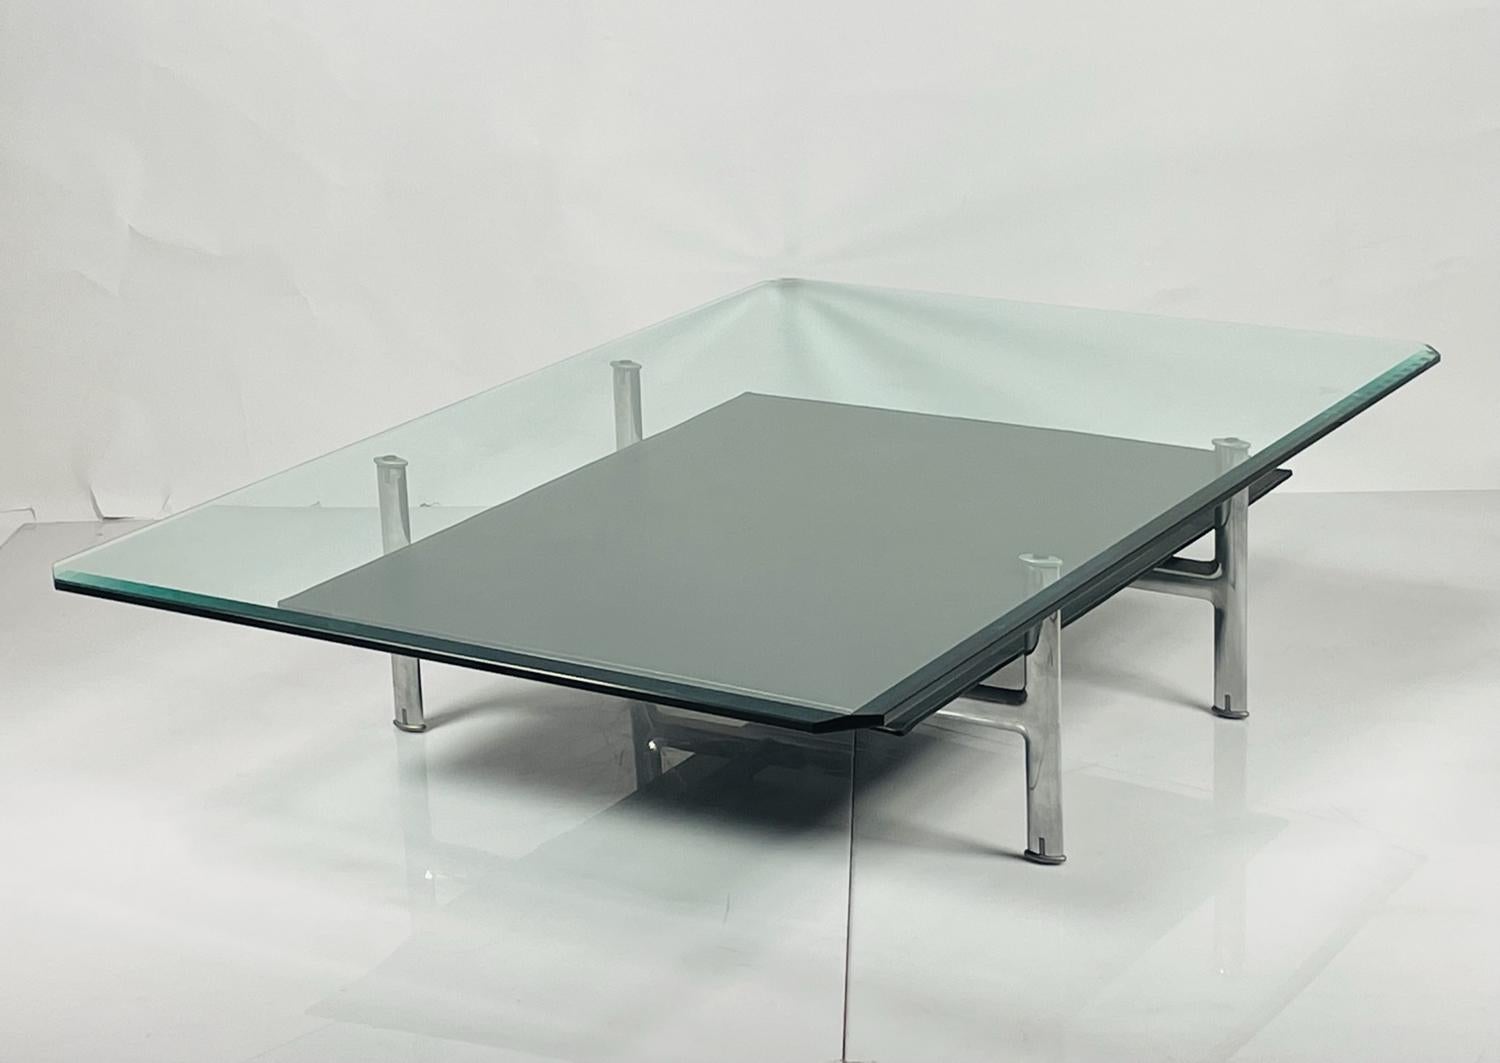 Beautiful coffee table designed and manufactured in the 1970s by Paolo Nava and Antonio Citterio, manufactured by B&B italia.

The table frame is made out of black leather and die-cast aluminum, the glass top has a beveled top and flat